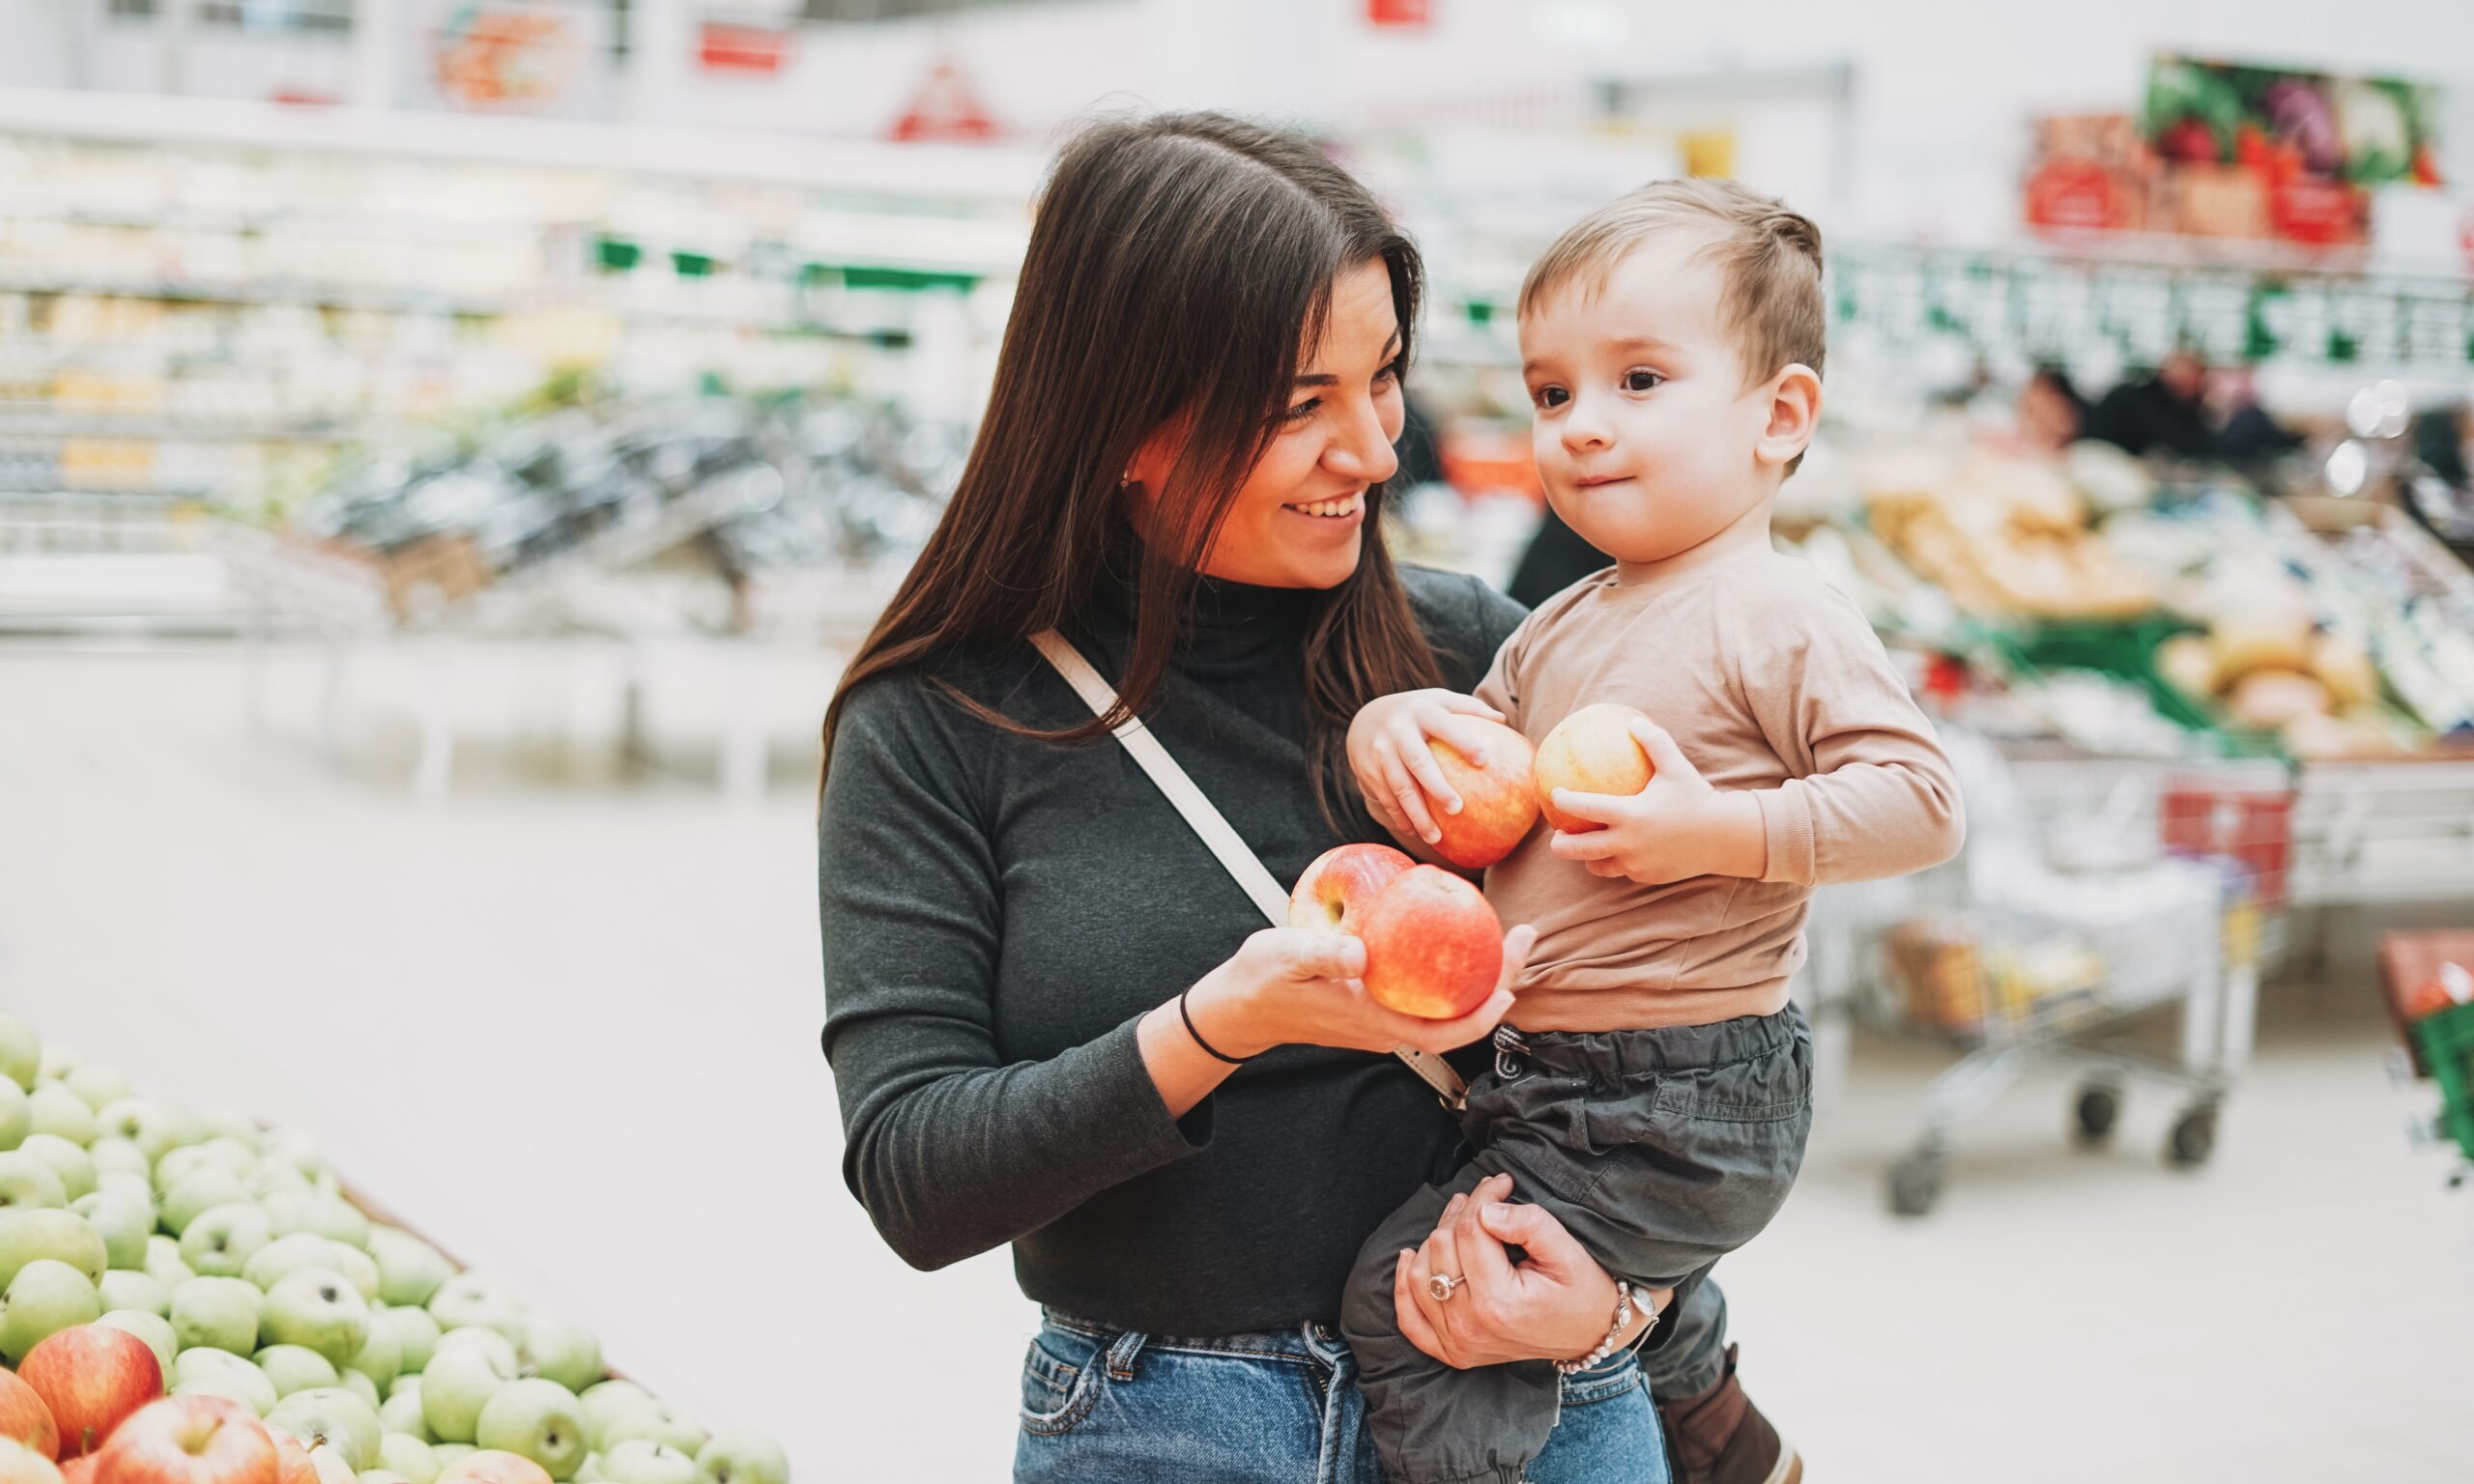 A woman wearing a turtle neck is holding a toddler in the produce section of the grocery store. They are both holding apples.